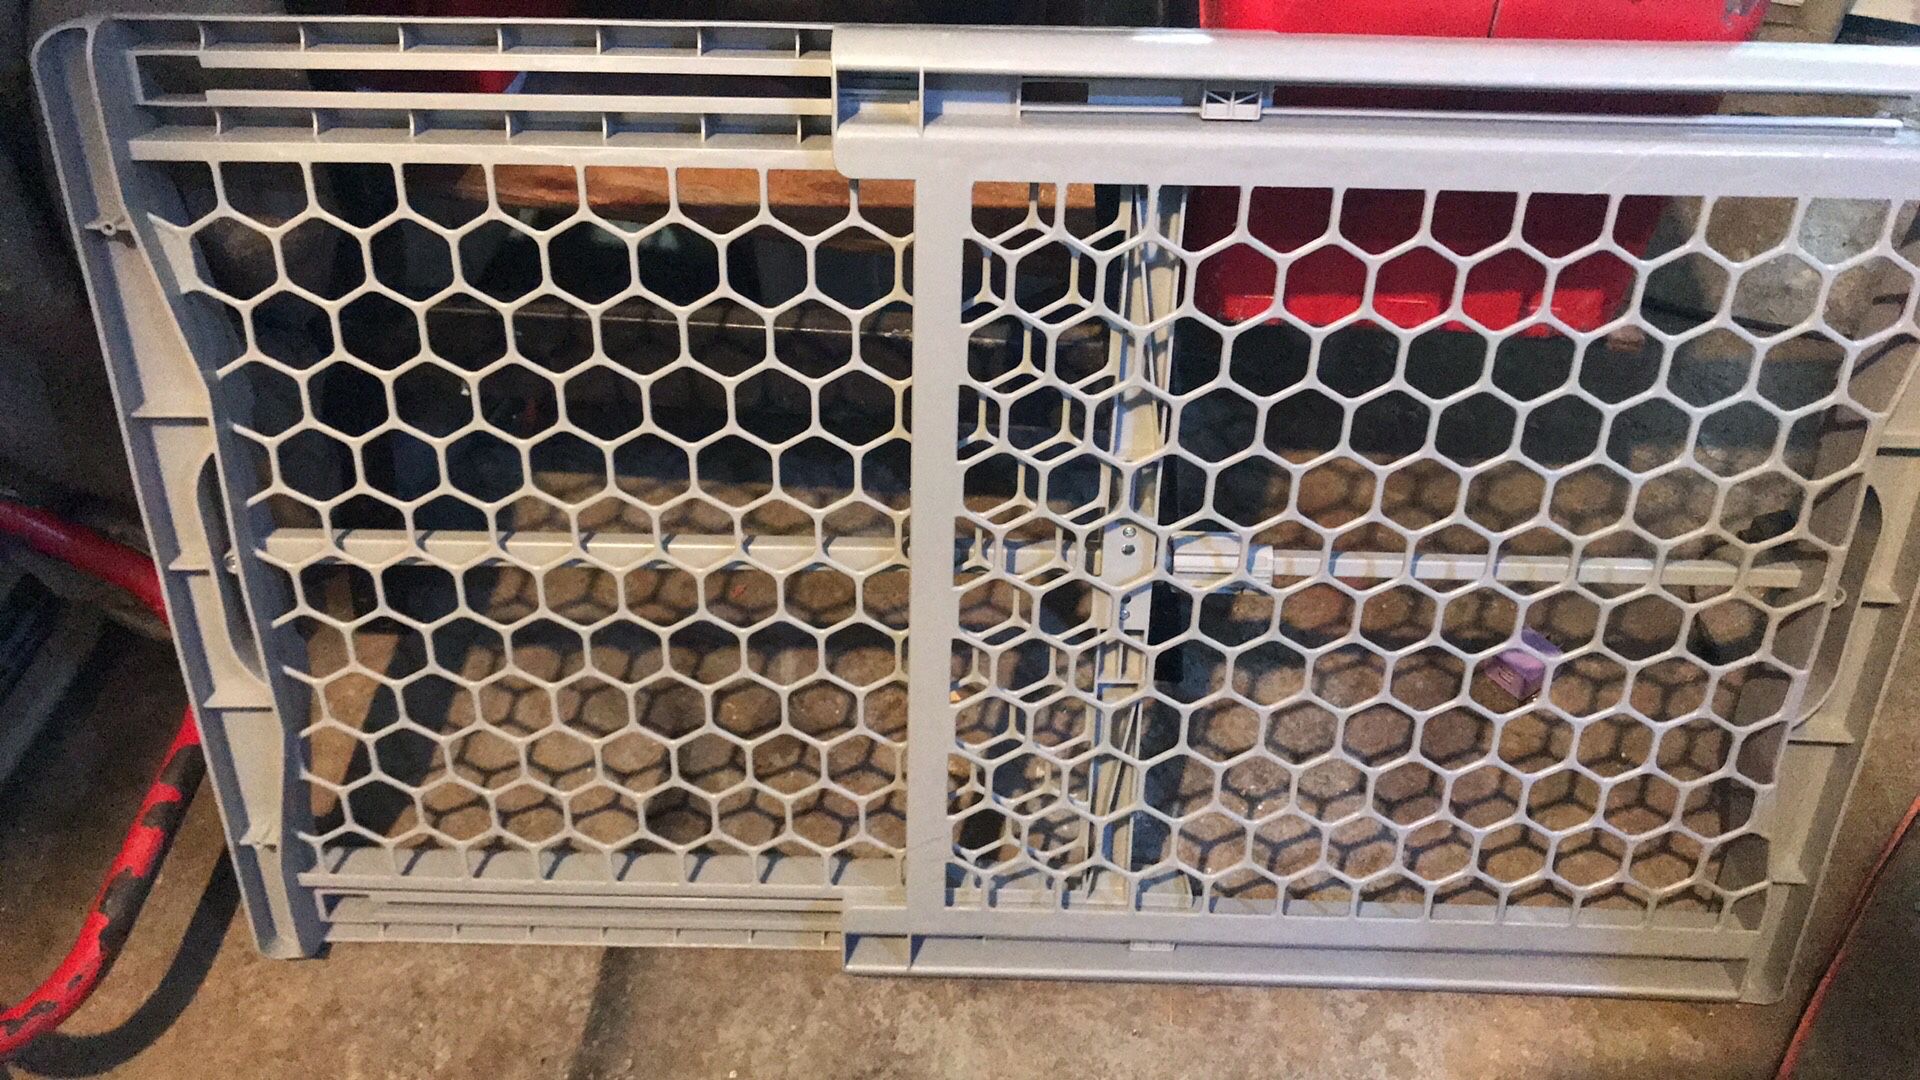 Brand new baby Or Dog safety gate